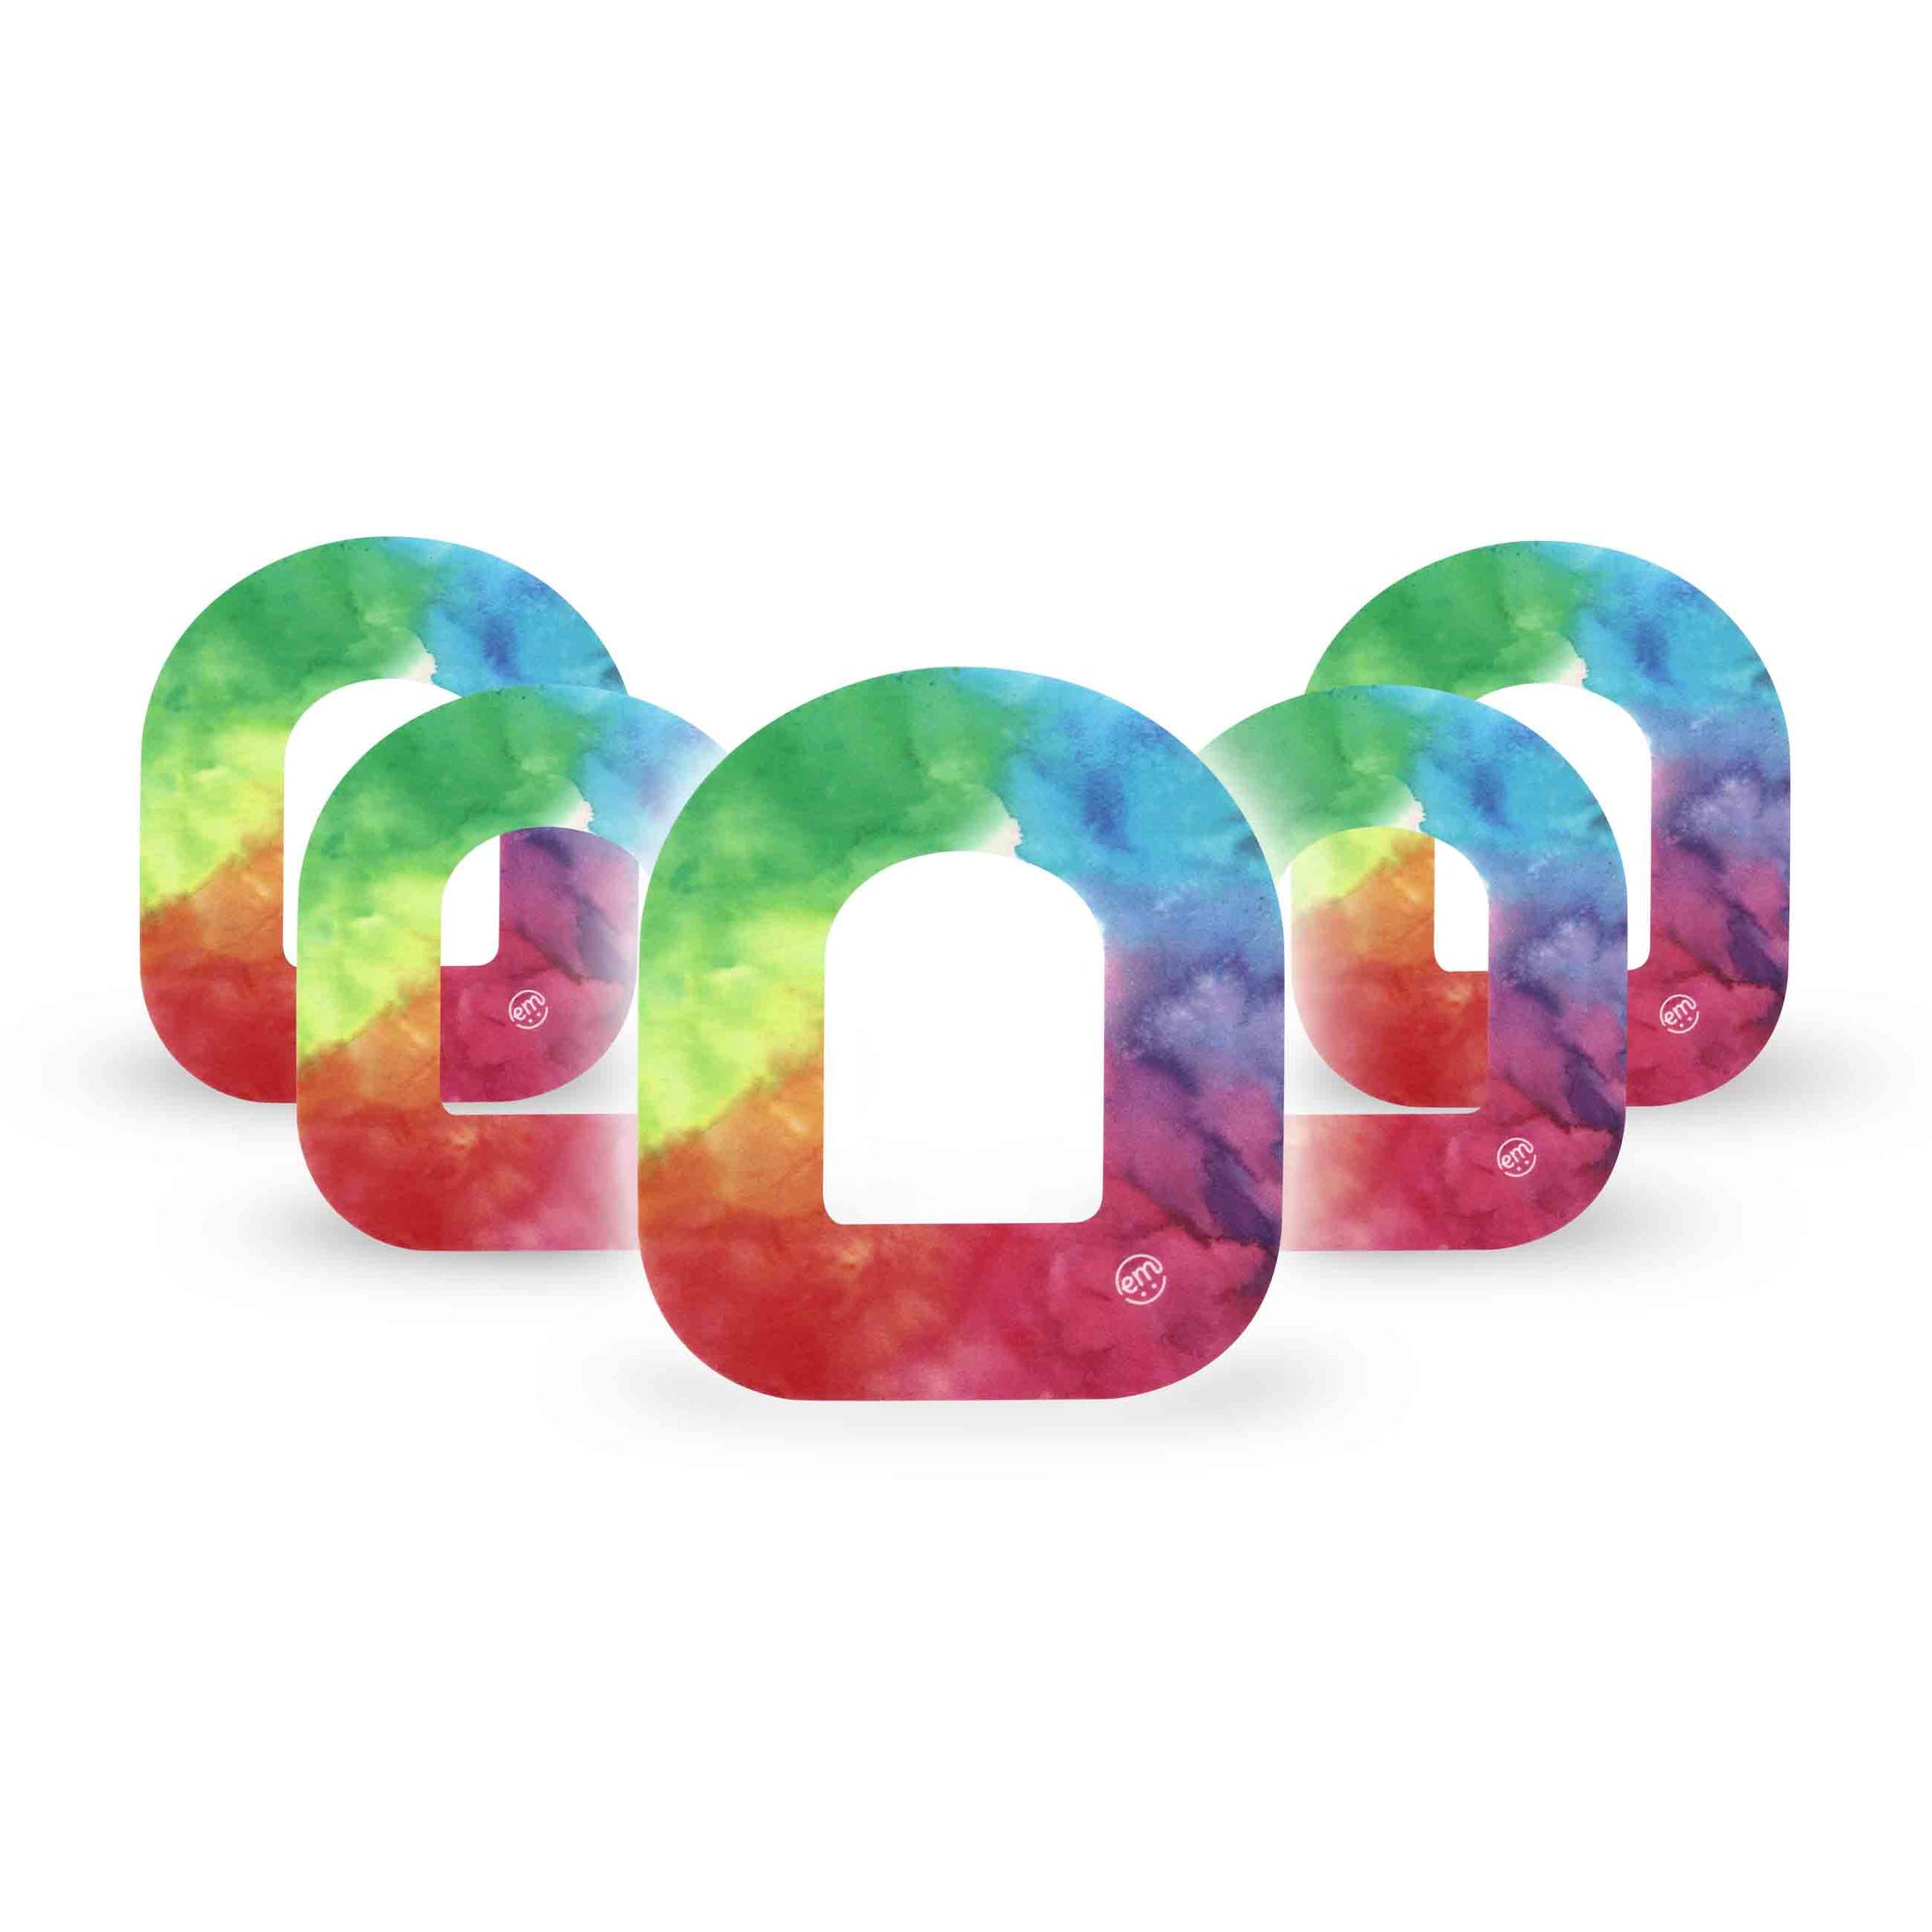 ExpressionMed Rainbow Cloud Omnipod Patch 5-Pack